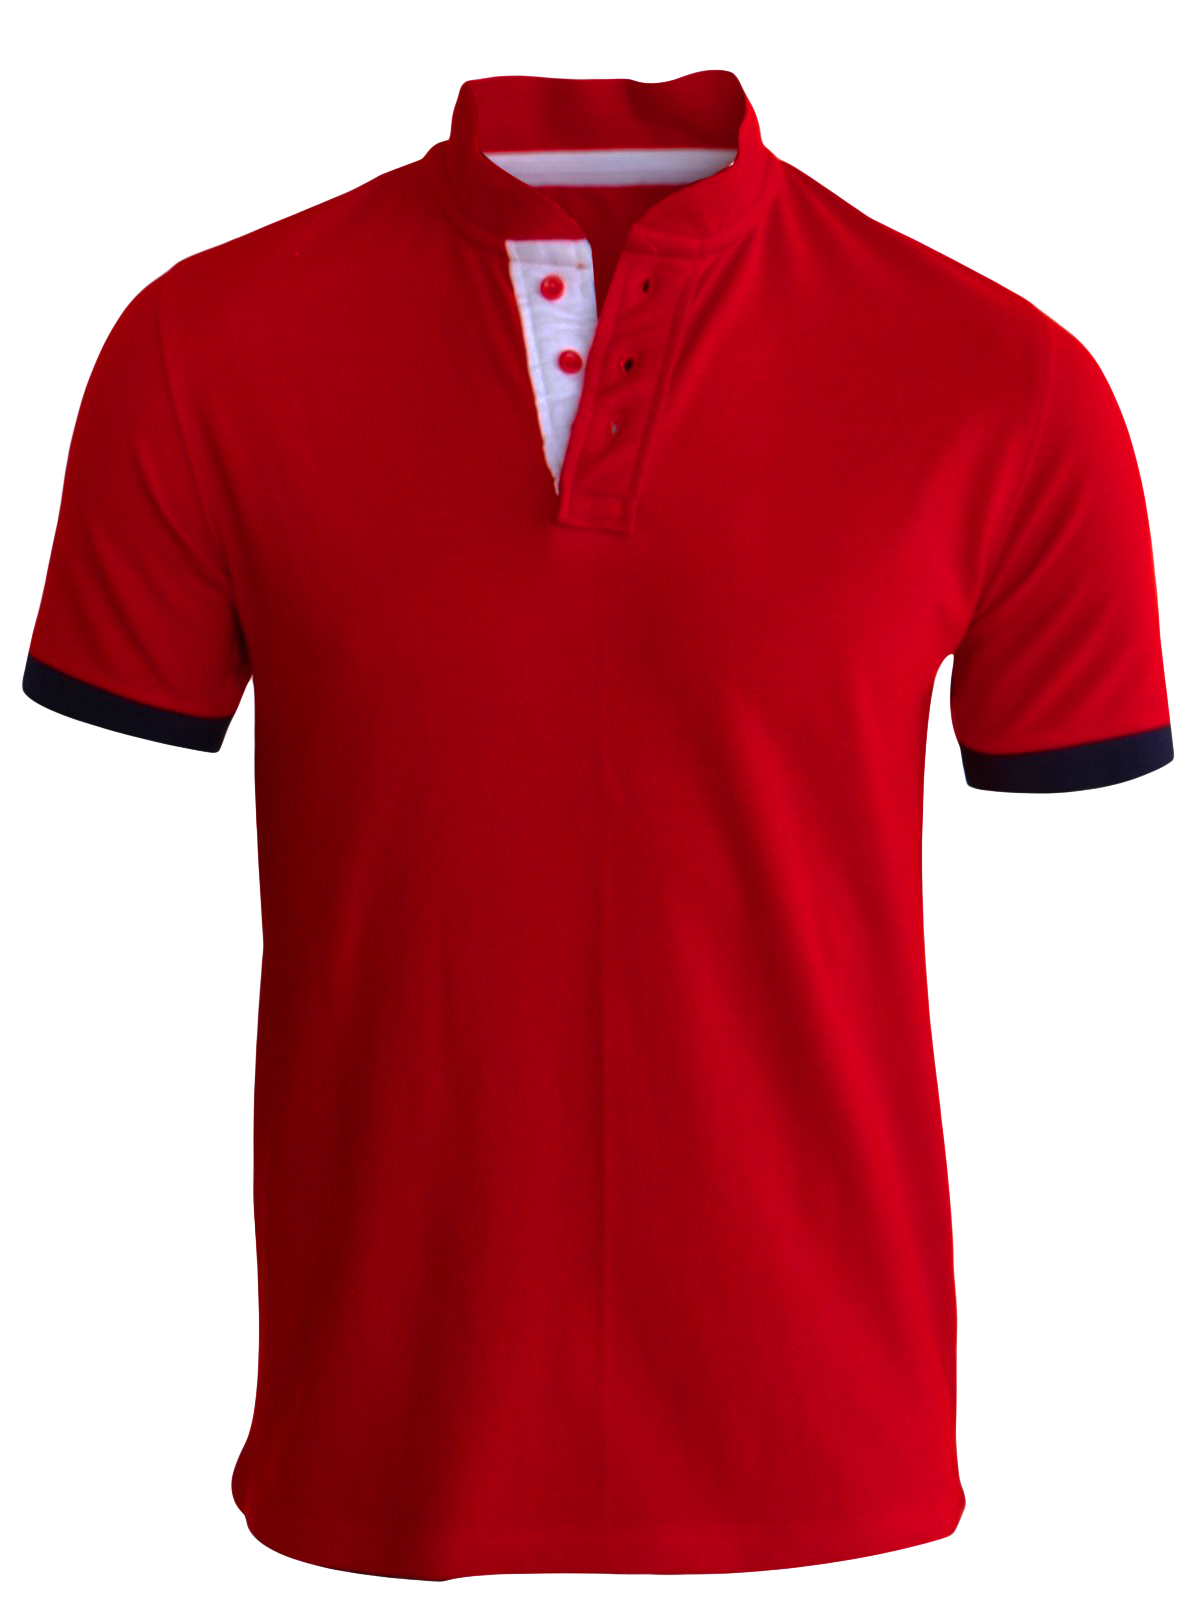 Red T-Shirt PNG Image